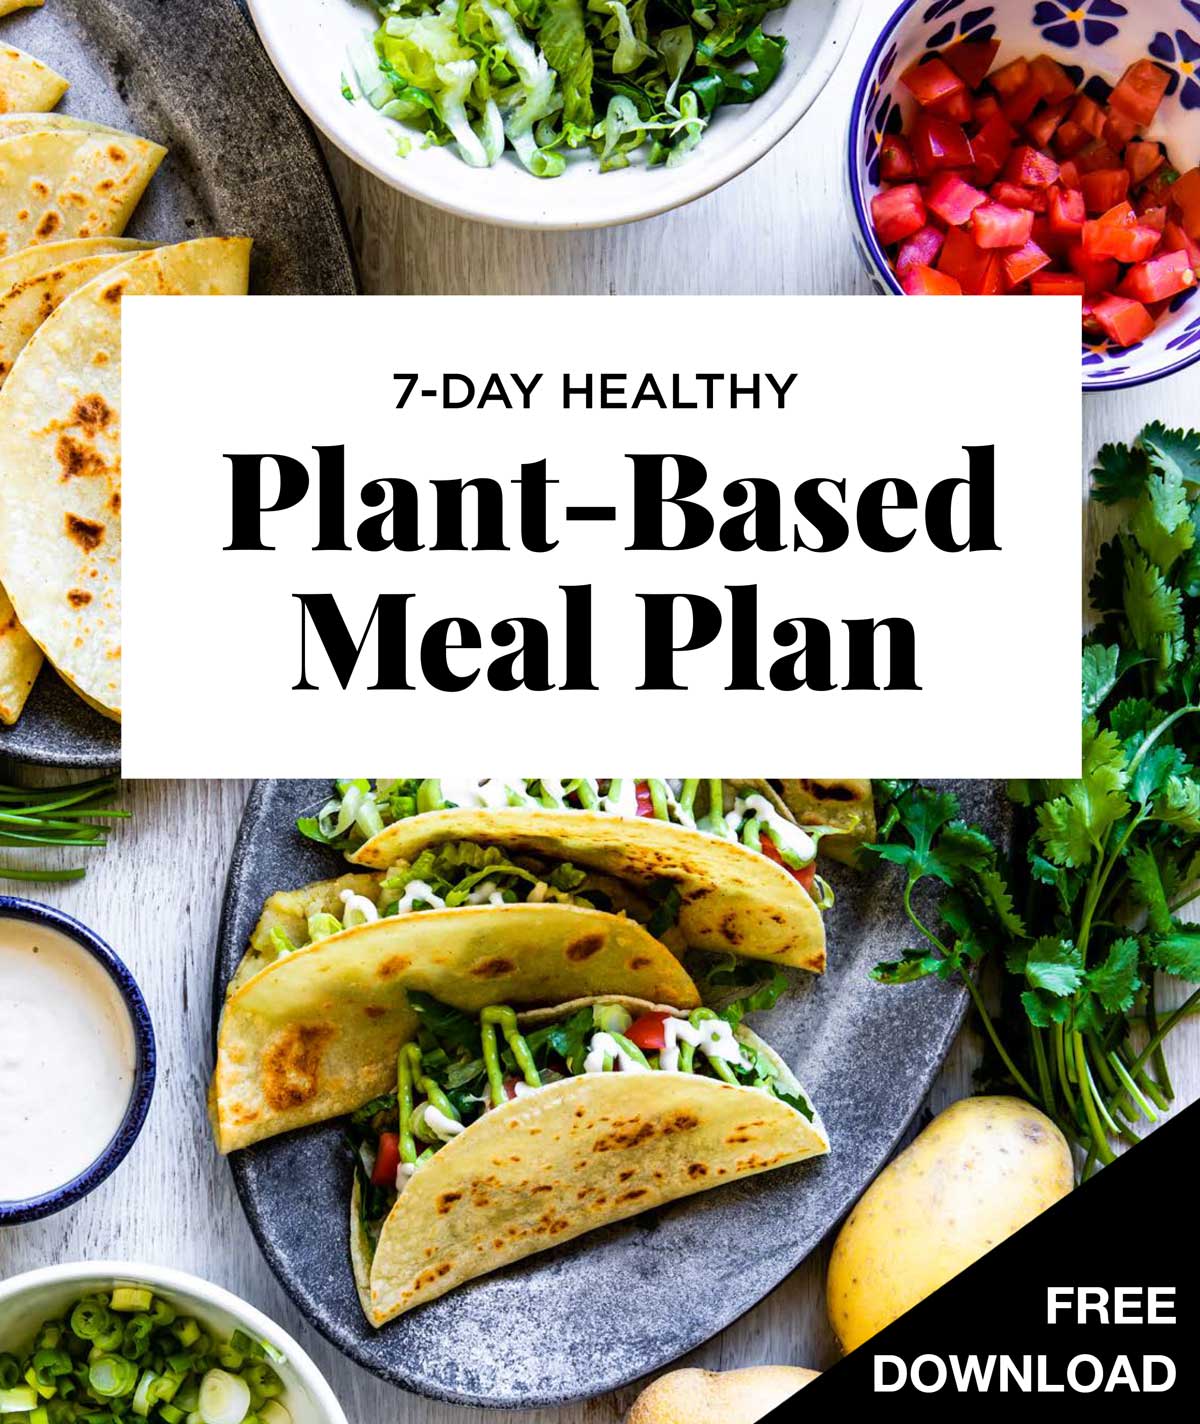 7-Day Healthy Plant-Based Meal Plan in black text in a white box over potato tacos.